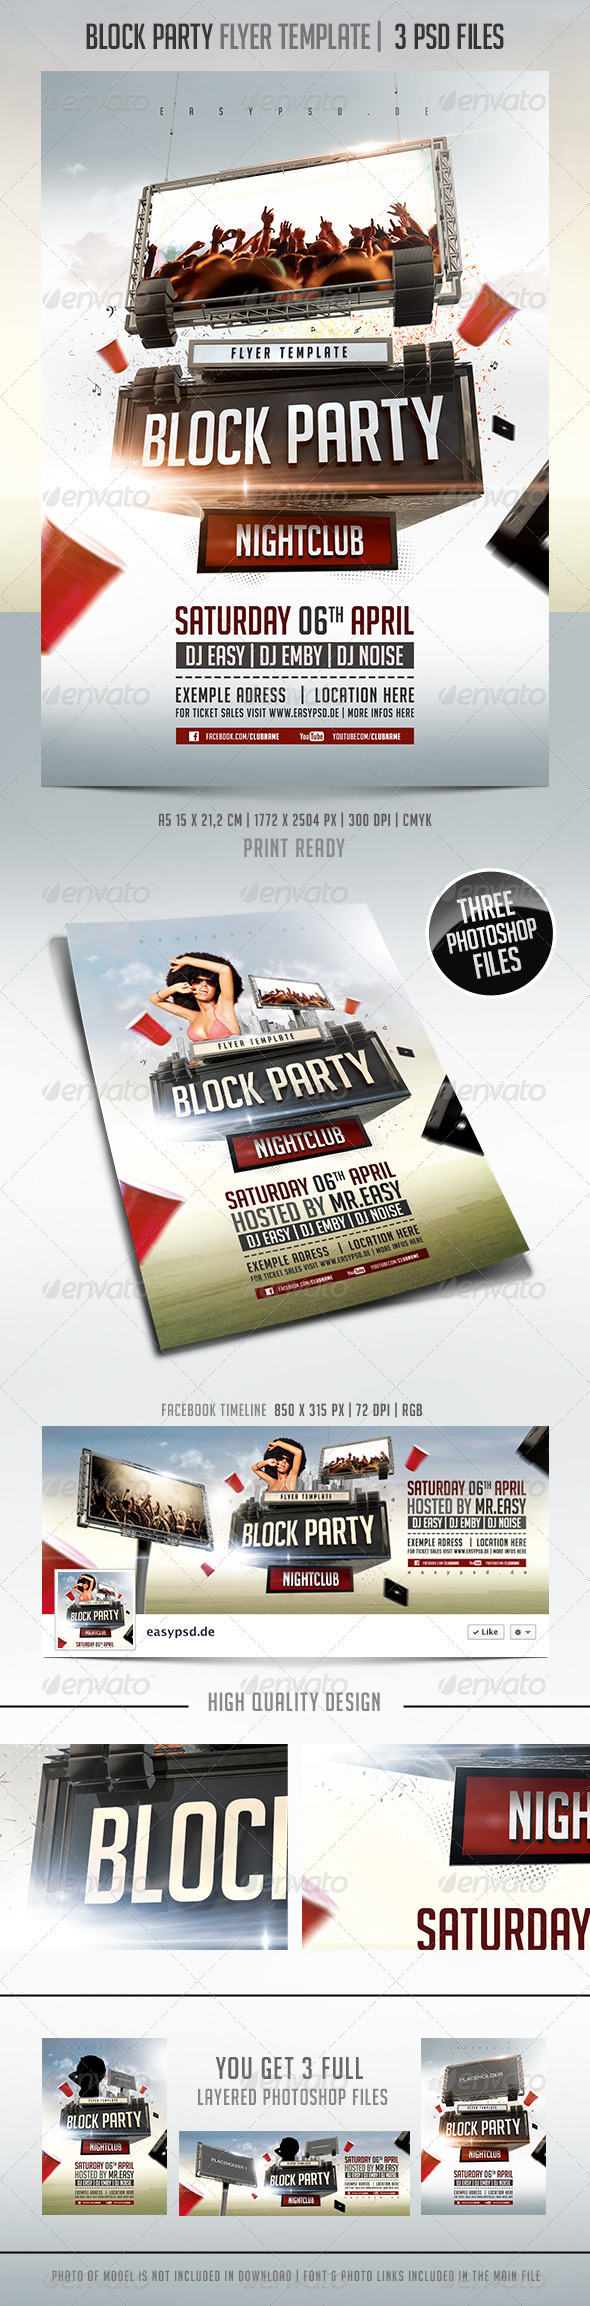 block-party-flyer-template-by-pixelfrei-graphicriver